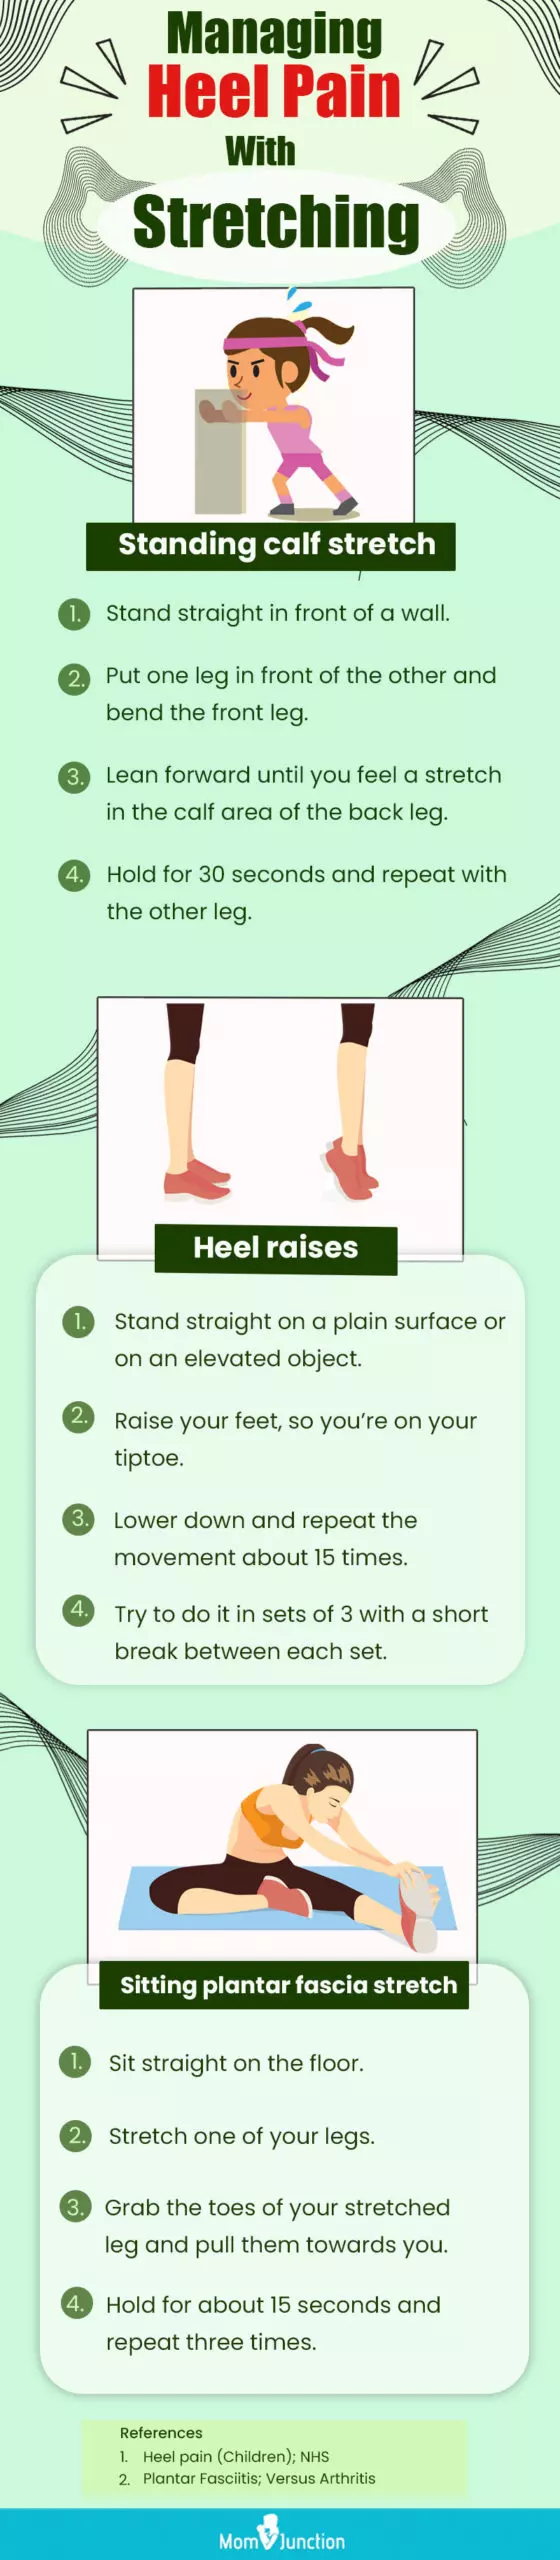 stretching exercises for child heel pain (infographic)